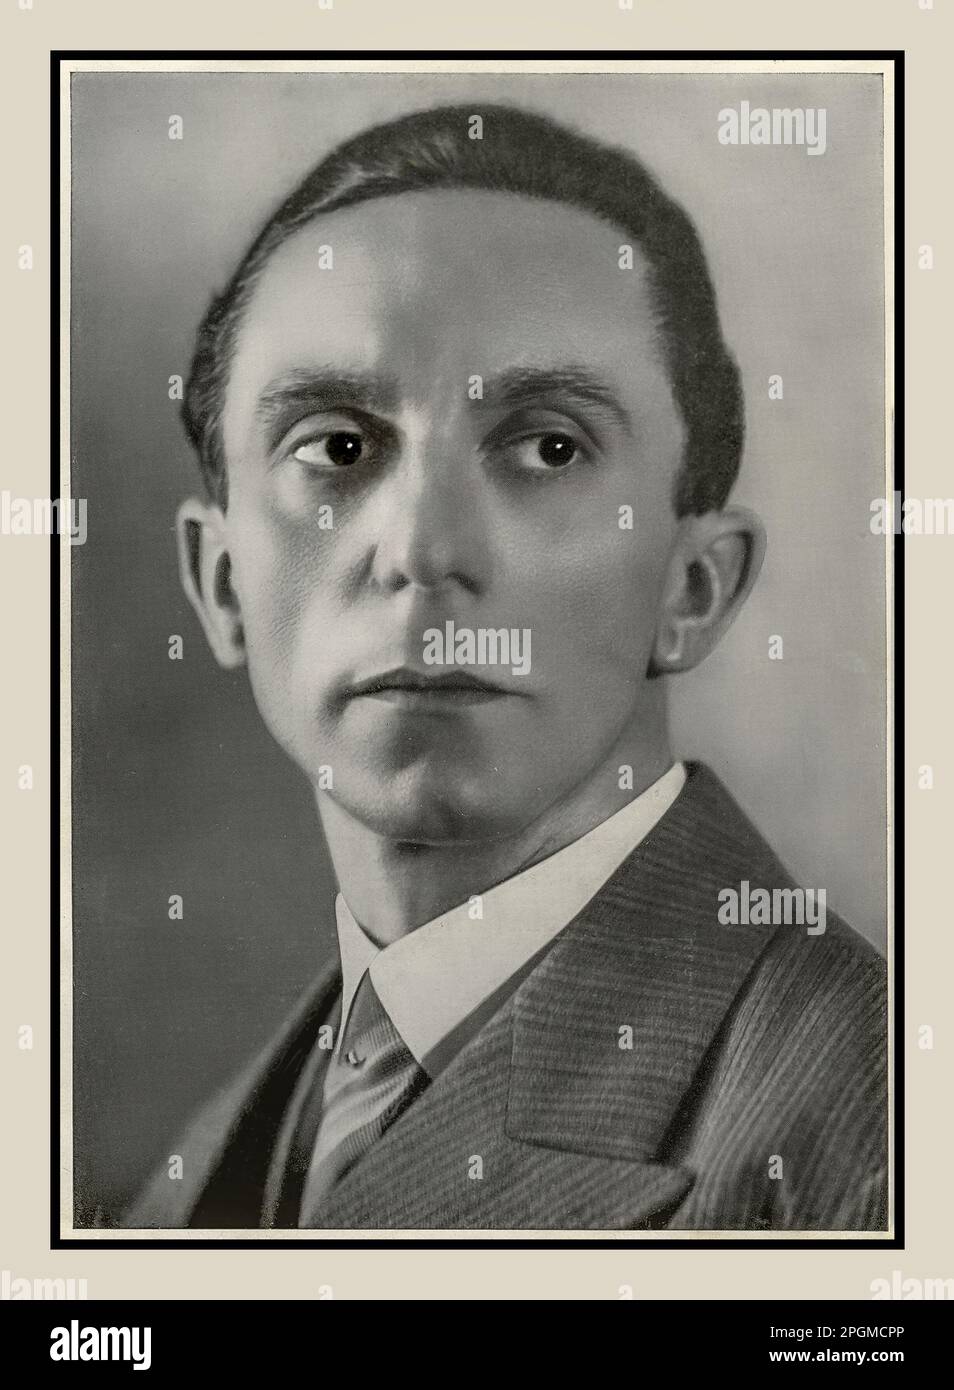 GOEBBELS 1930s Joseph Goebbels formal studio portrait. Dr Paul Joseph Goebbels was a German Nazi politician who was the Gauleiter of Berlin, chief propagandist for the Nazi Party, and then Reich Minister of Propaganda from 1933 to 1945 when he committed suicide in Hitlers Berlin bunker to escape arrest from the advancing allied forces. Stock Photo